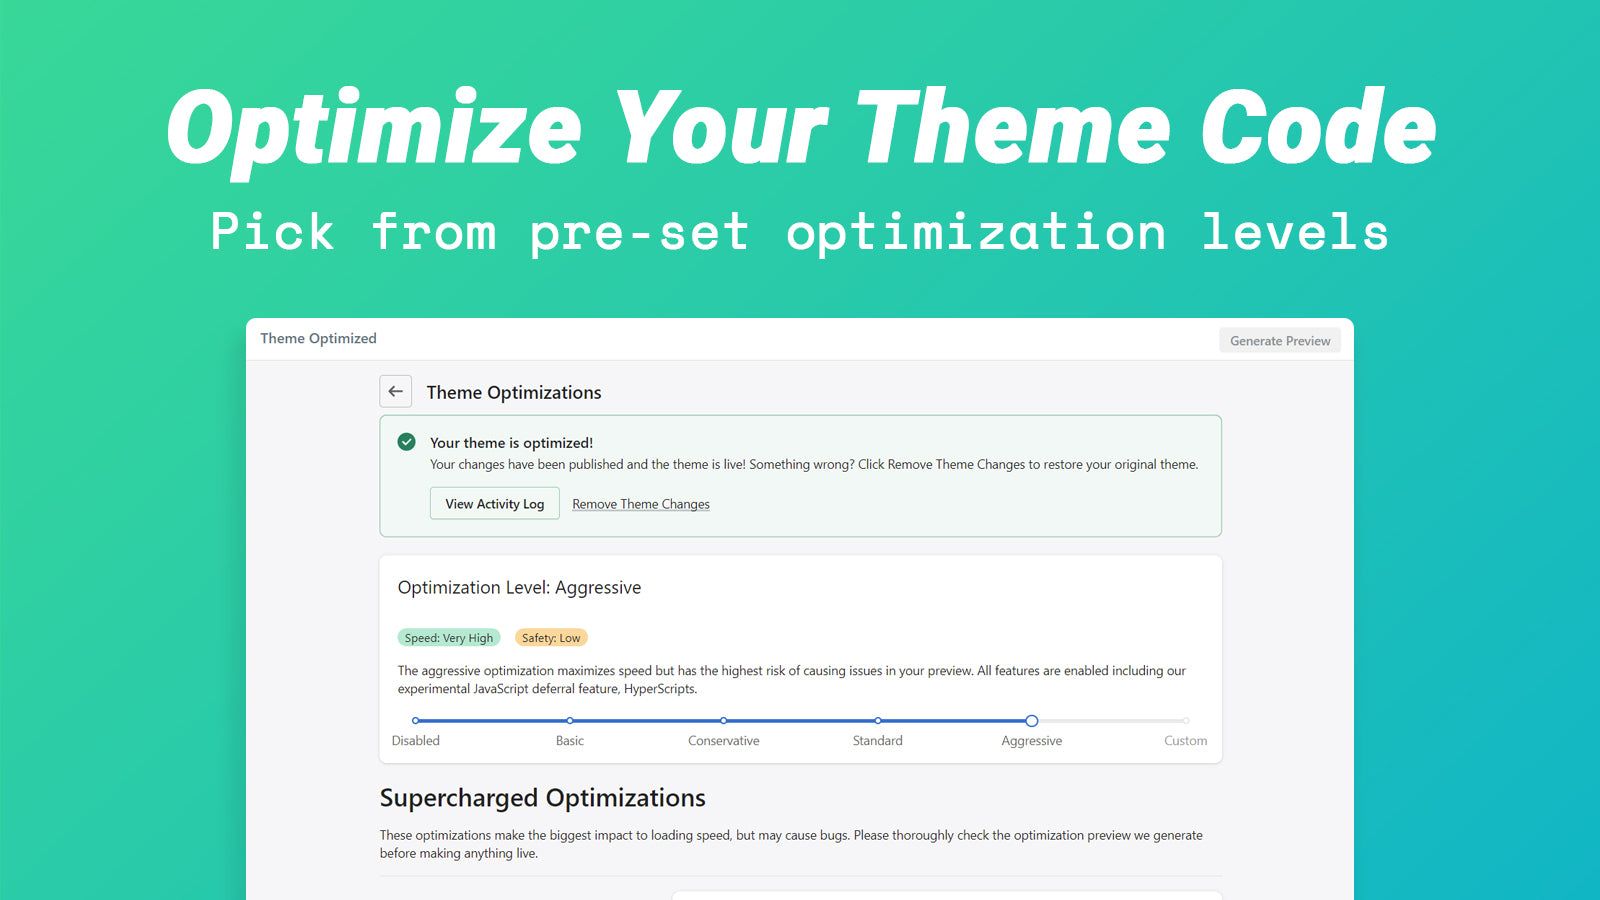 Choose your theme optimization level and speed up your code.